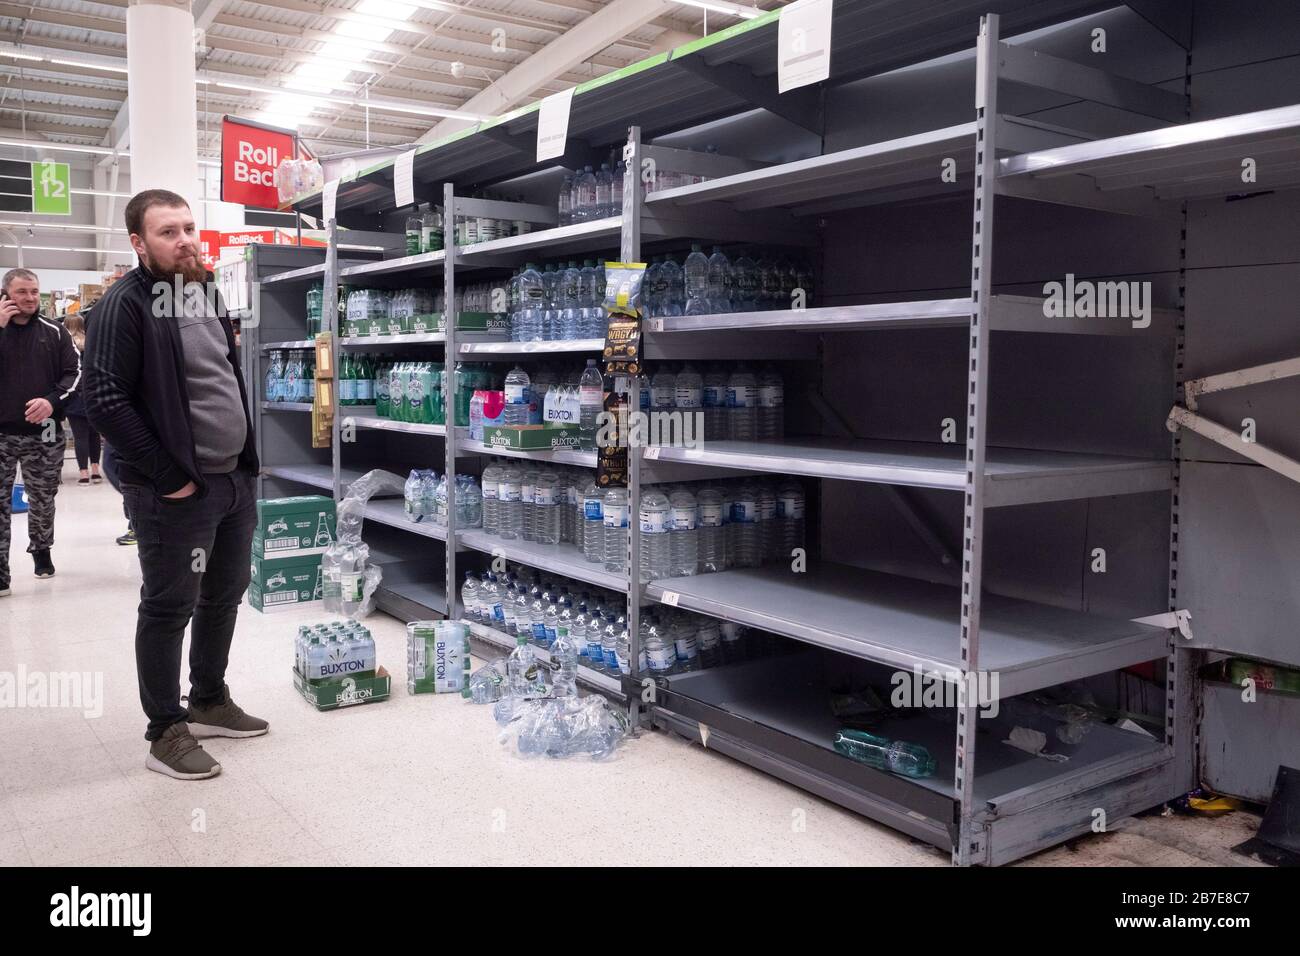 15 March 2020. London, United Kingdom. Shoppers at a supermarket panic buying items as the Coronavirus disease outbreak spreads across the UK. Household and food items such as pasta, toilet paper and cleaning products have been in short supply. Photo by Ray Tang/Ray Tang Media Stock Photo